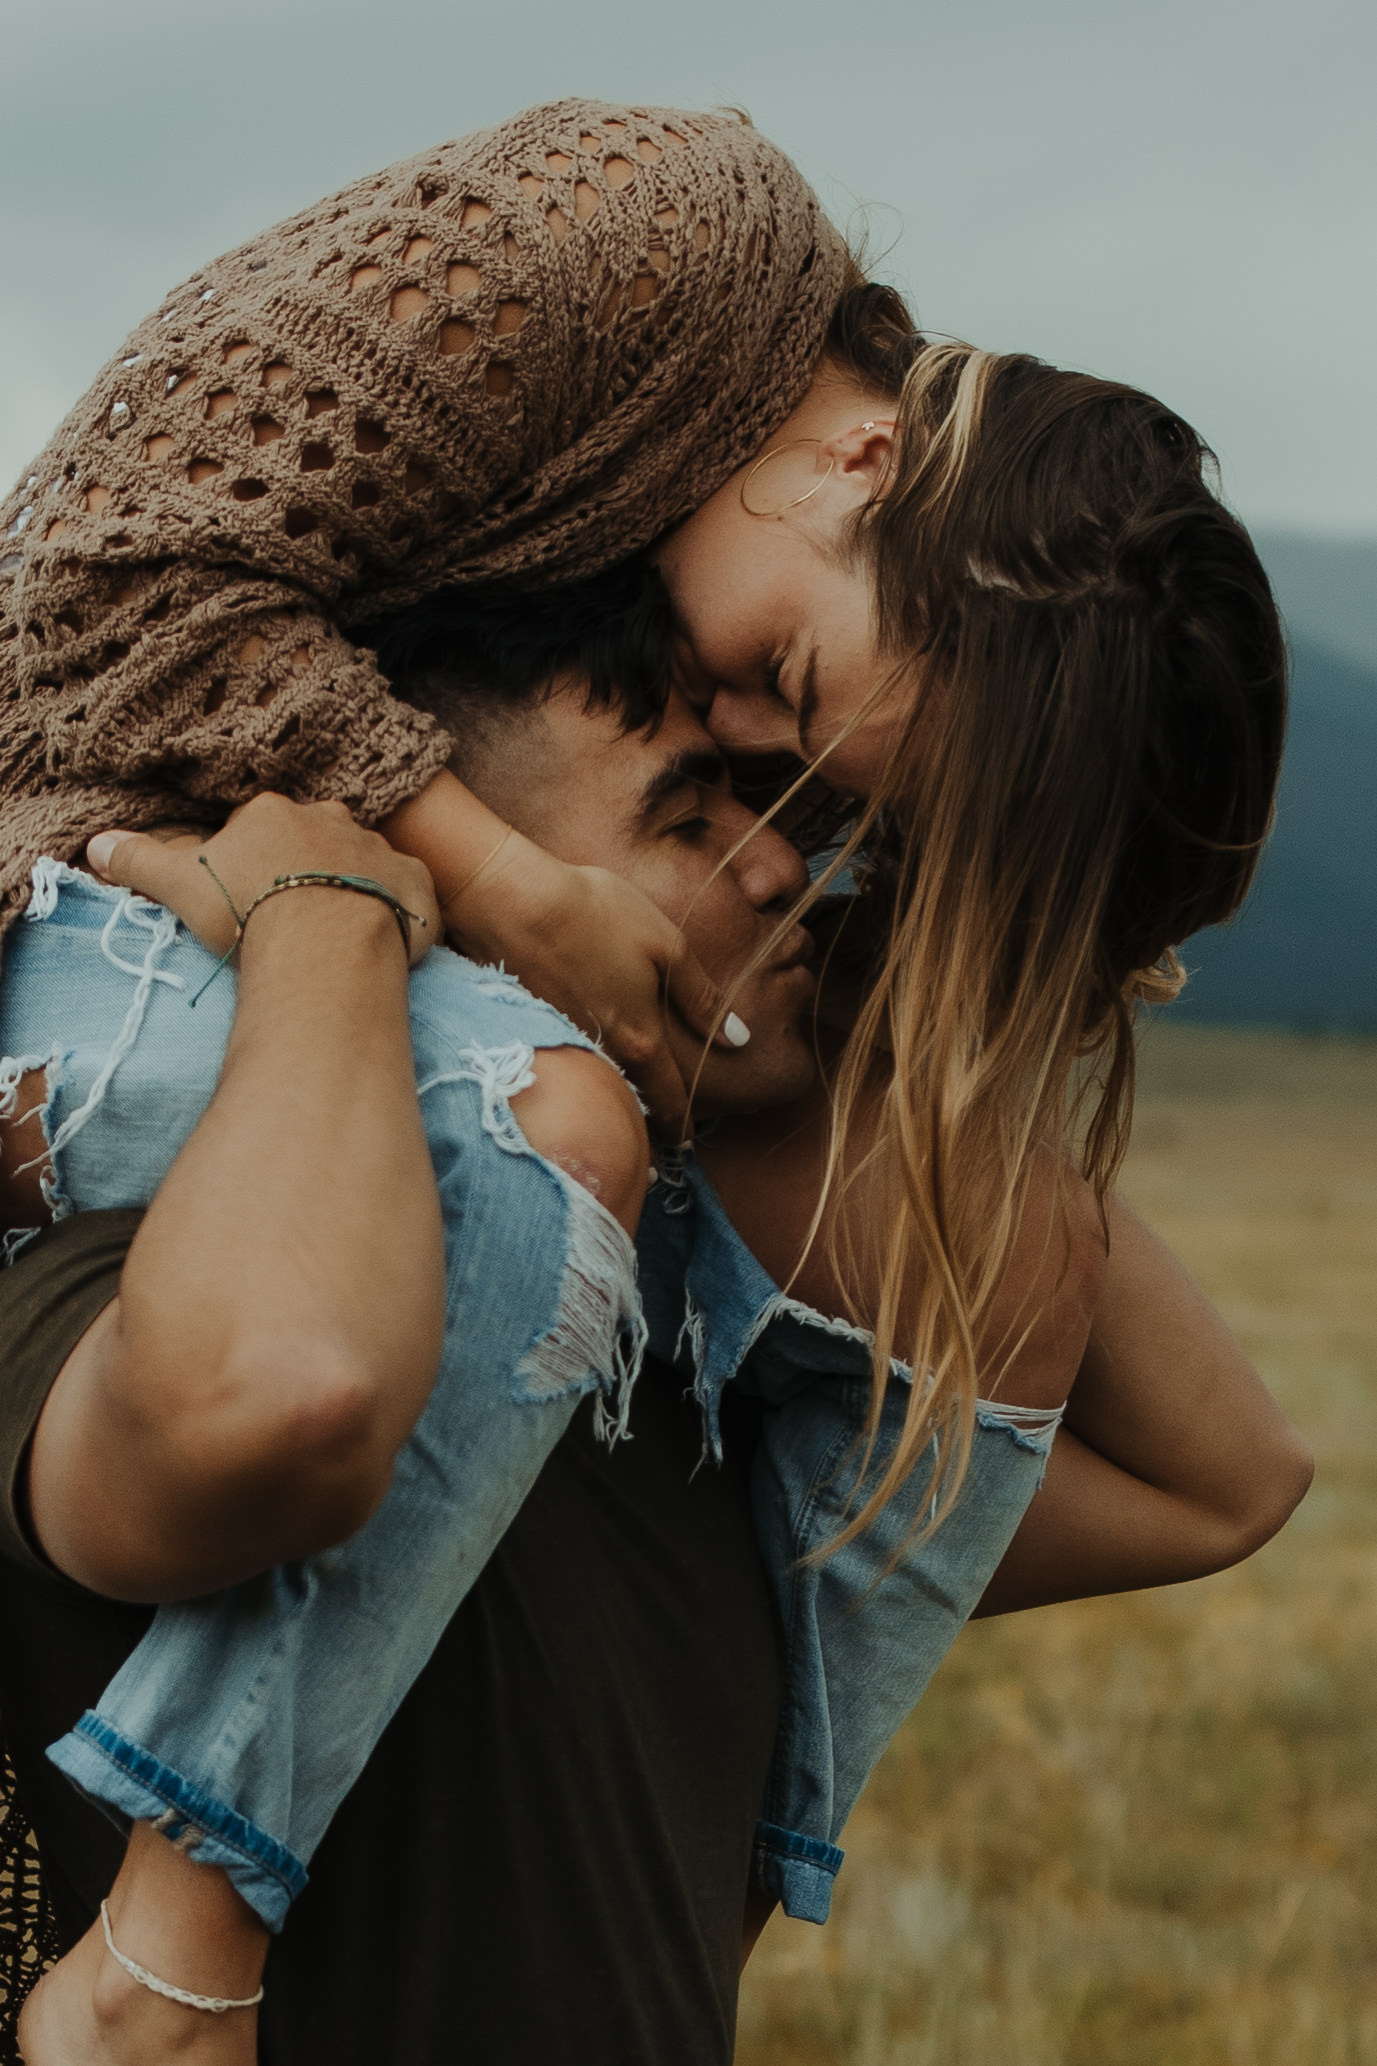 Grunge couple with girl on guys' shoulder kissing with Colorado mountains behind them